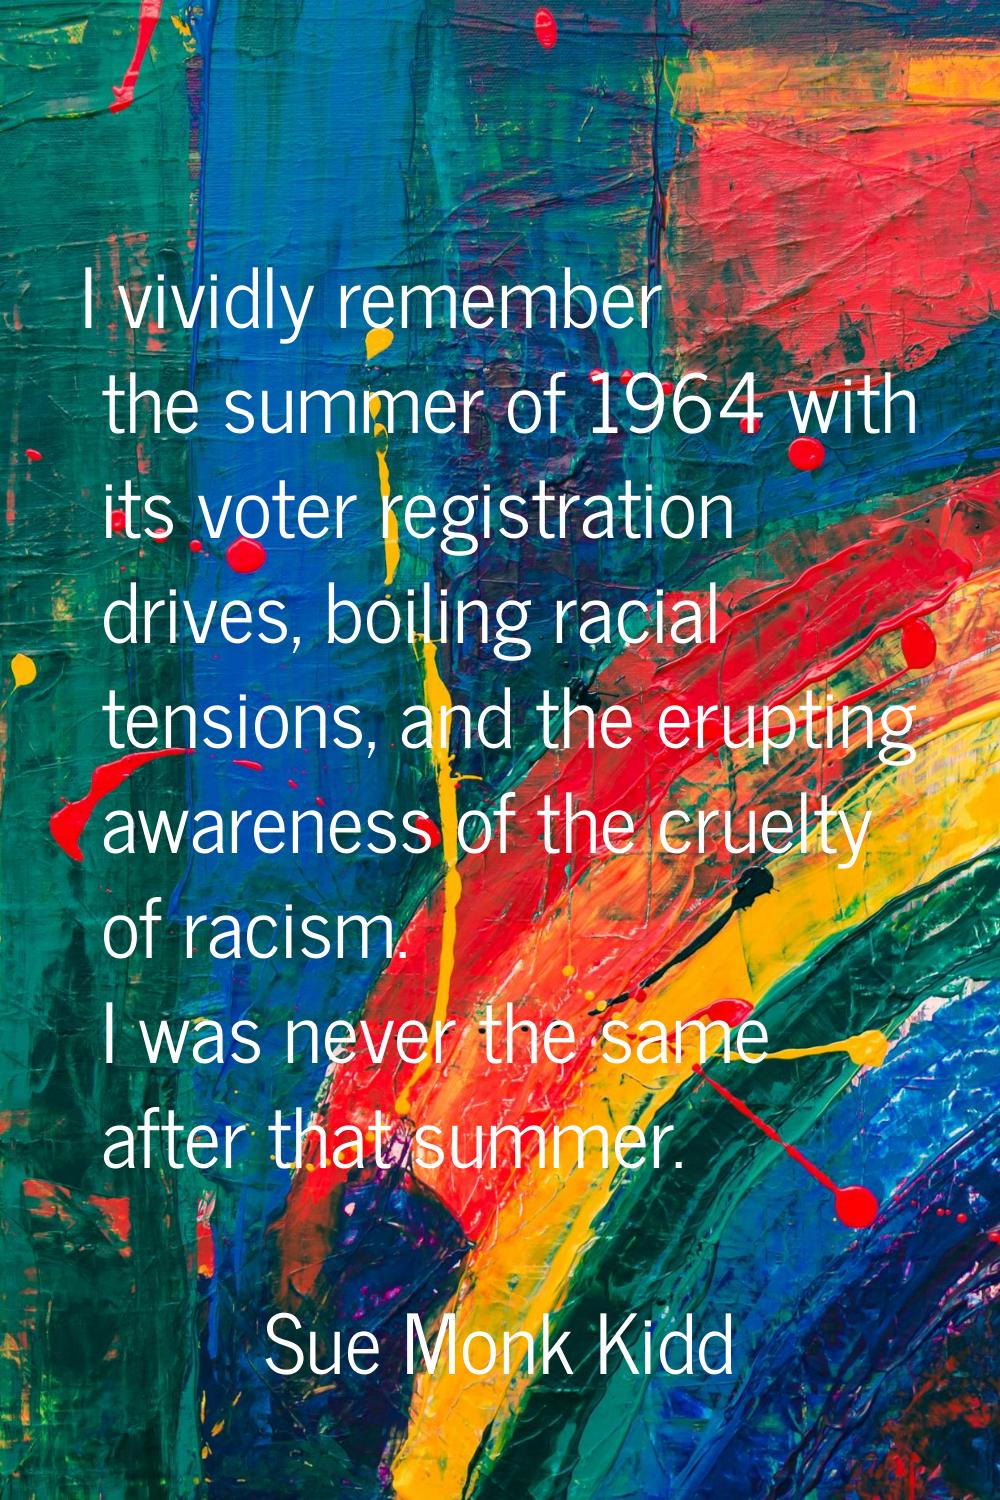 I vividly remember the summer of 1964 with its voter registration drives, boiling racial tensions, 